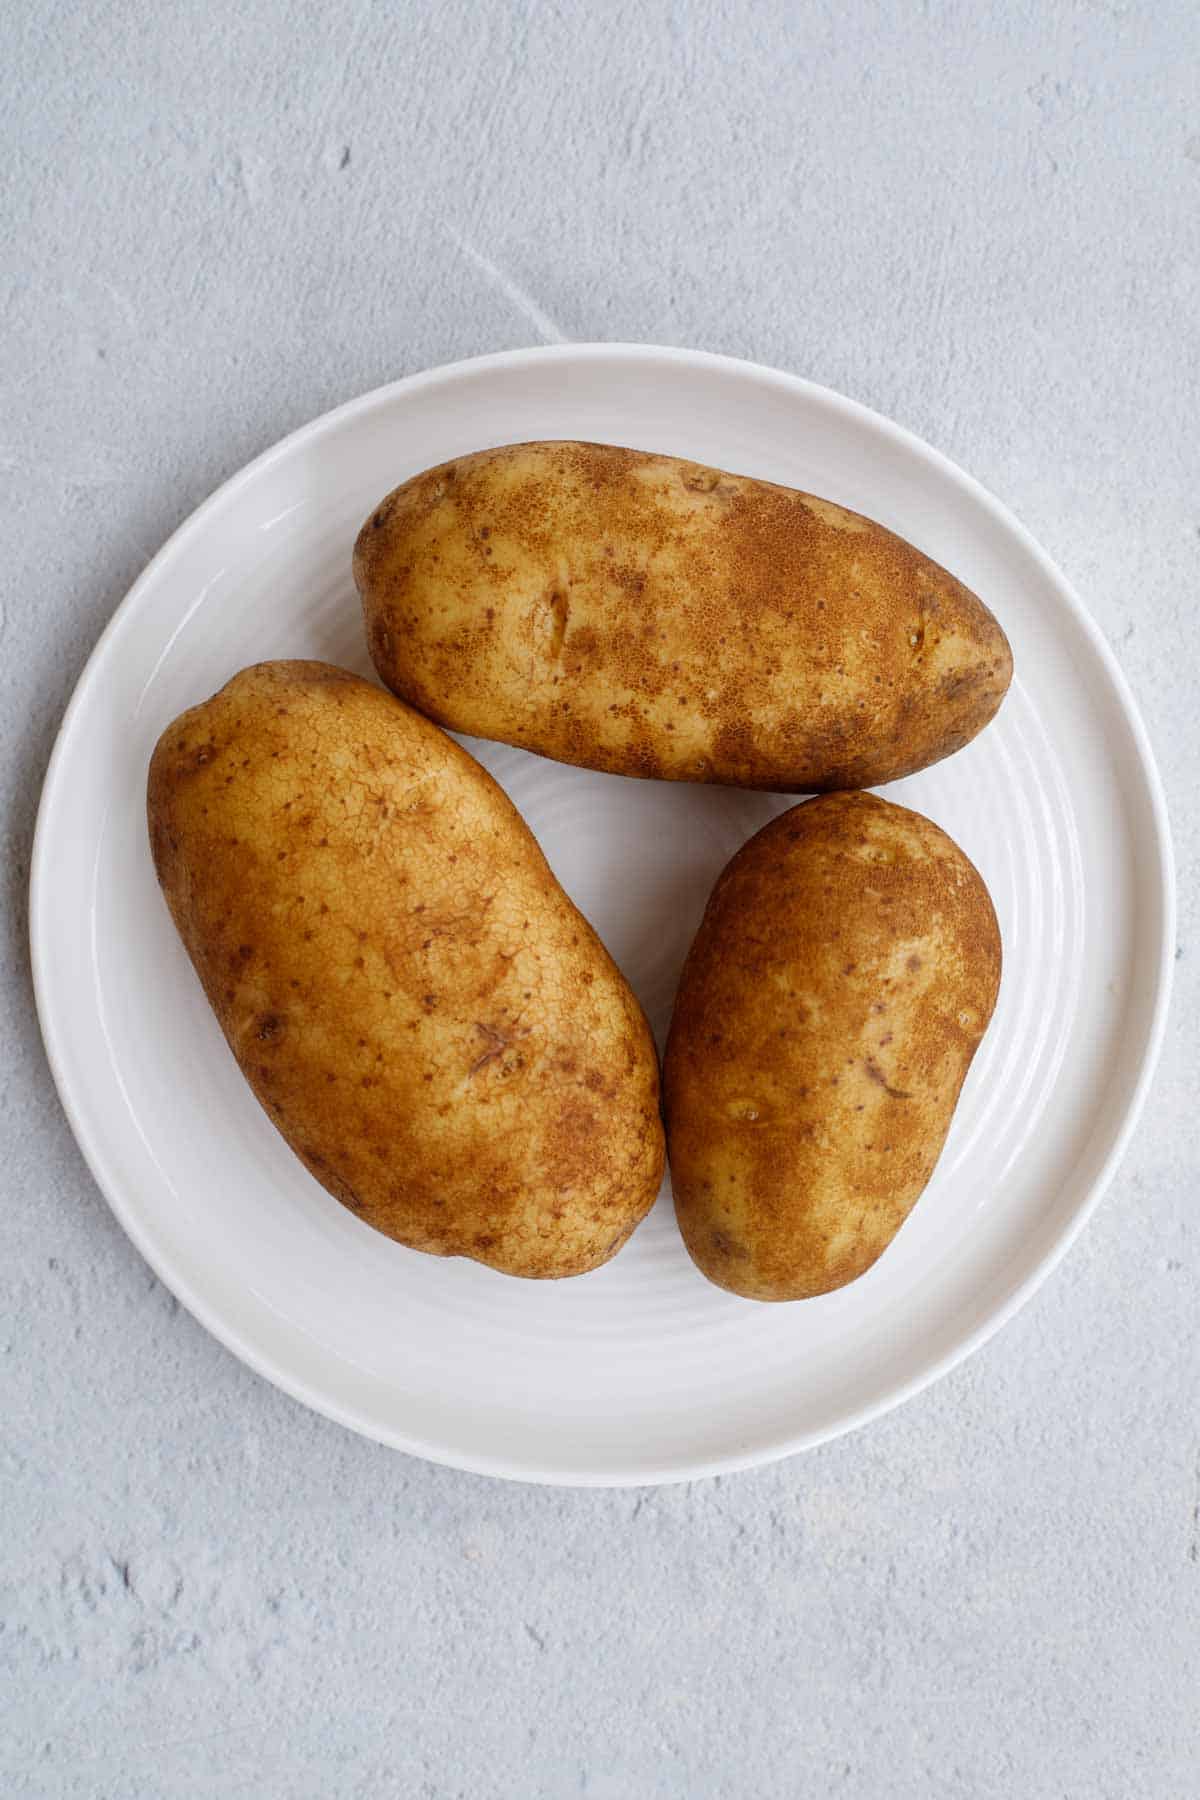 Russet potatoes on a plate. 